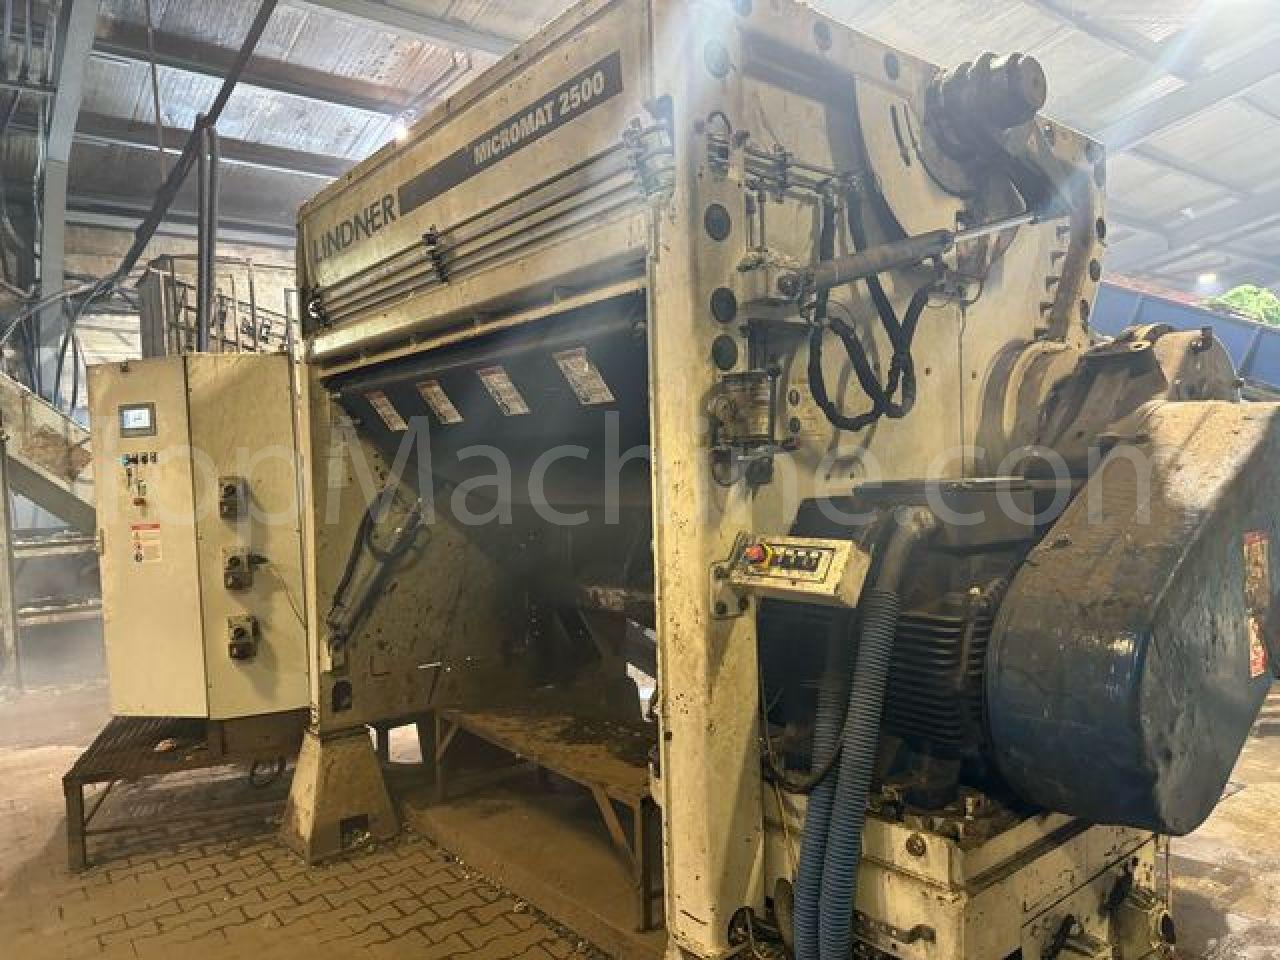 Used Lindner Micromat 2500 Recycling Shredders